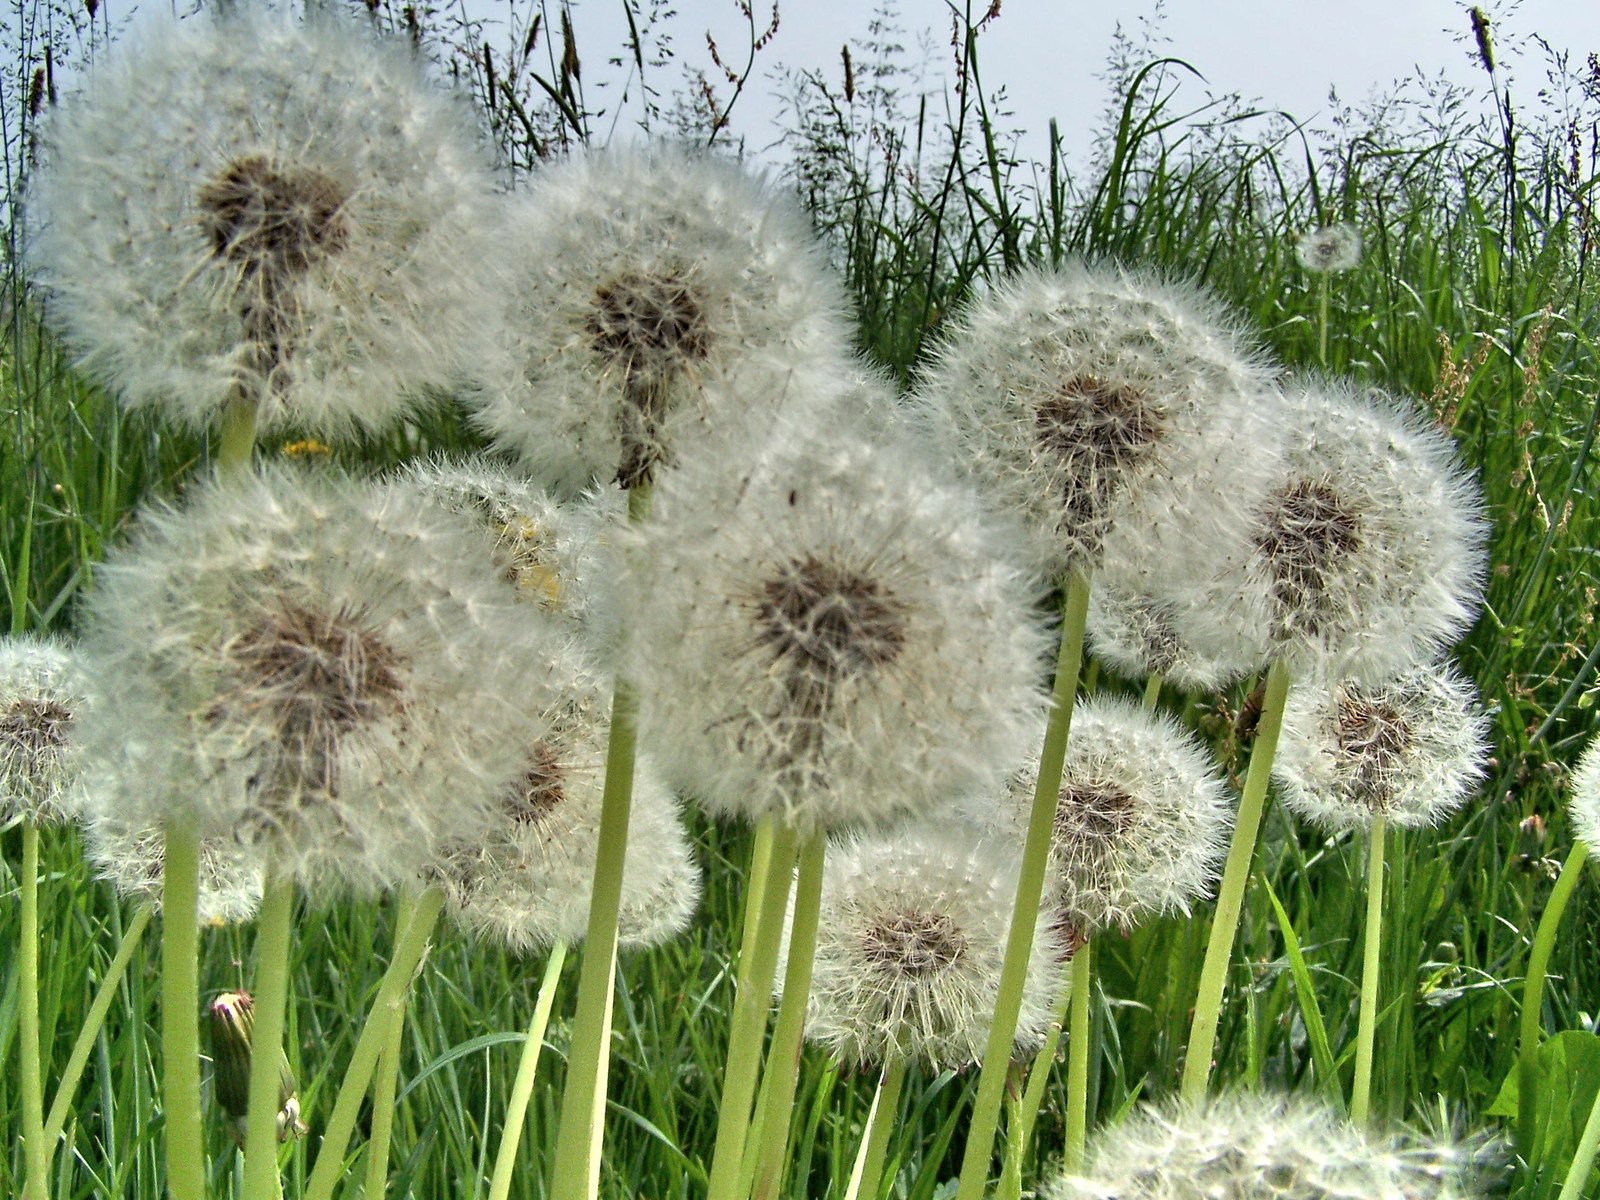 there is a close up of some dandelions